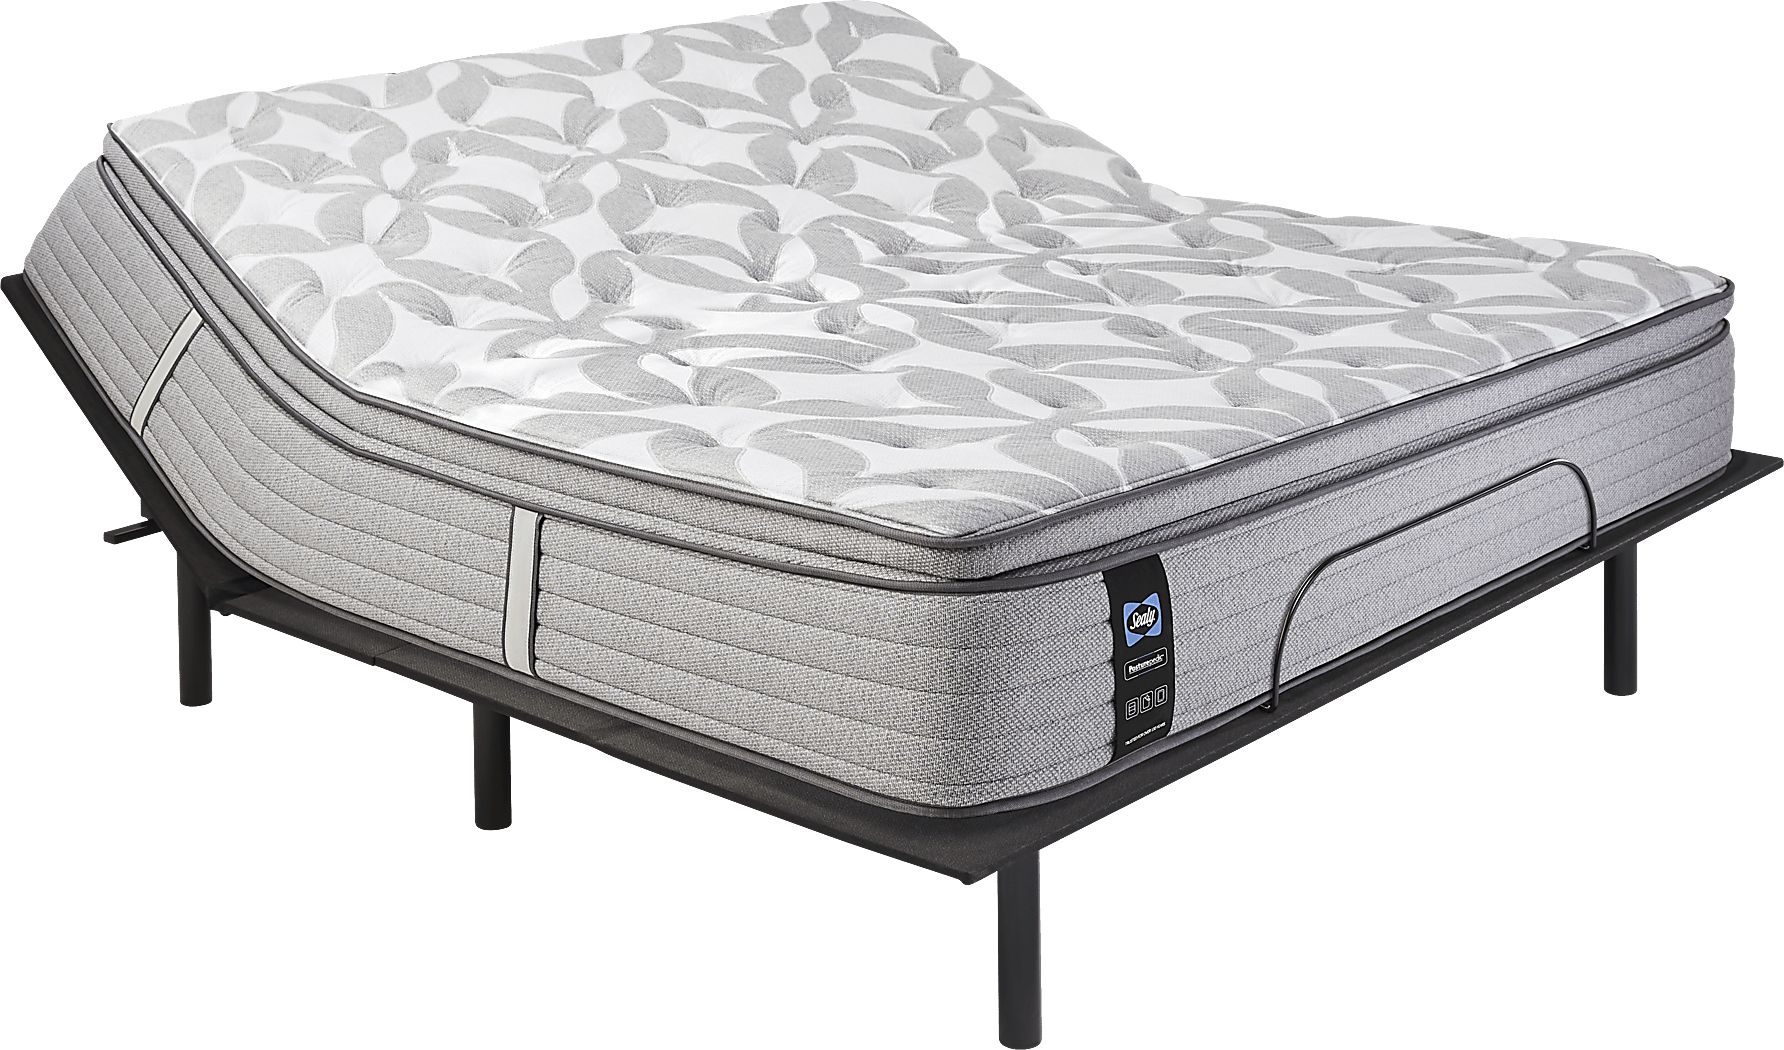 department stores that sell sealy posturepedic mattresses